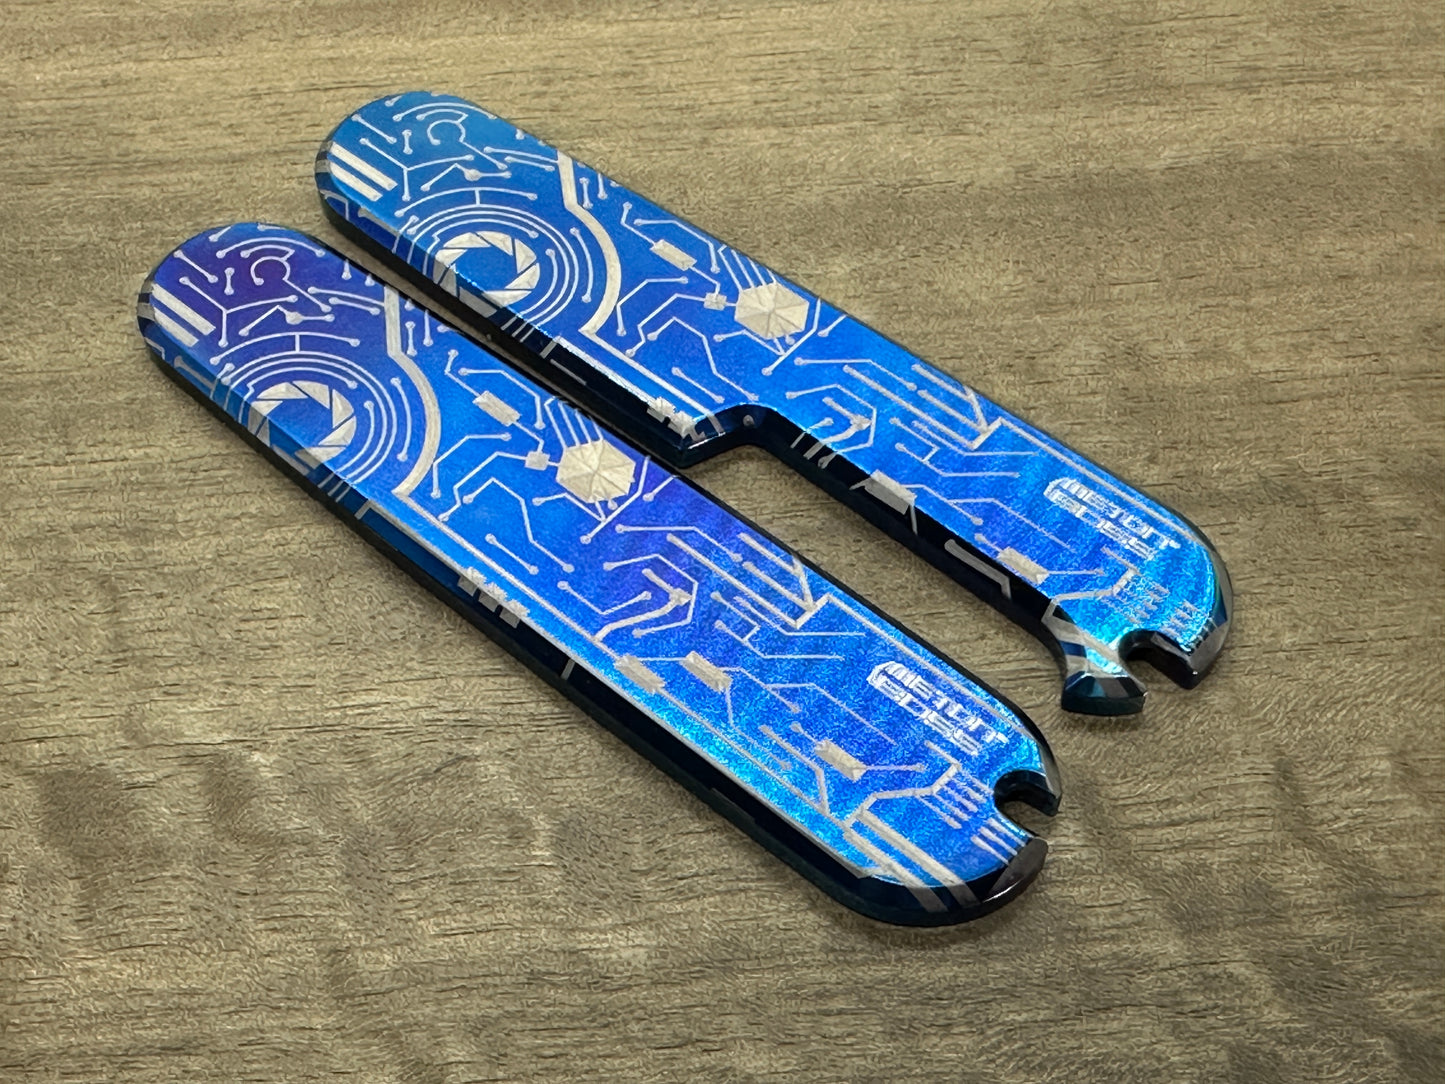 Flamed Polished CIRCUIT Board engraved 91mm Titanium Scales for Swiss Army